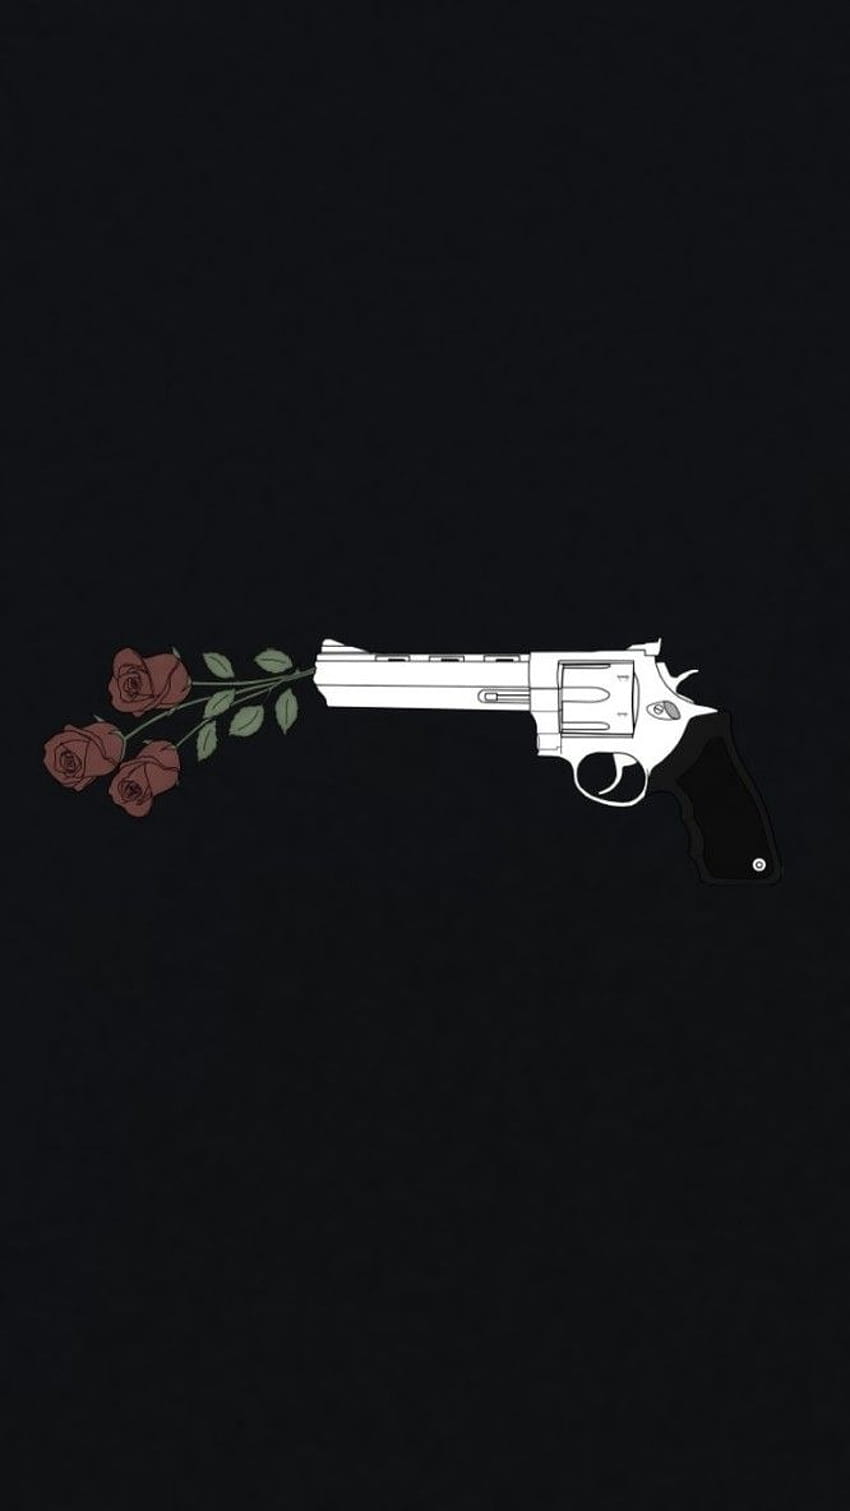 Pin about Iphone on PHONE, aesthetic gun HD phone wallpaper